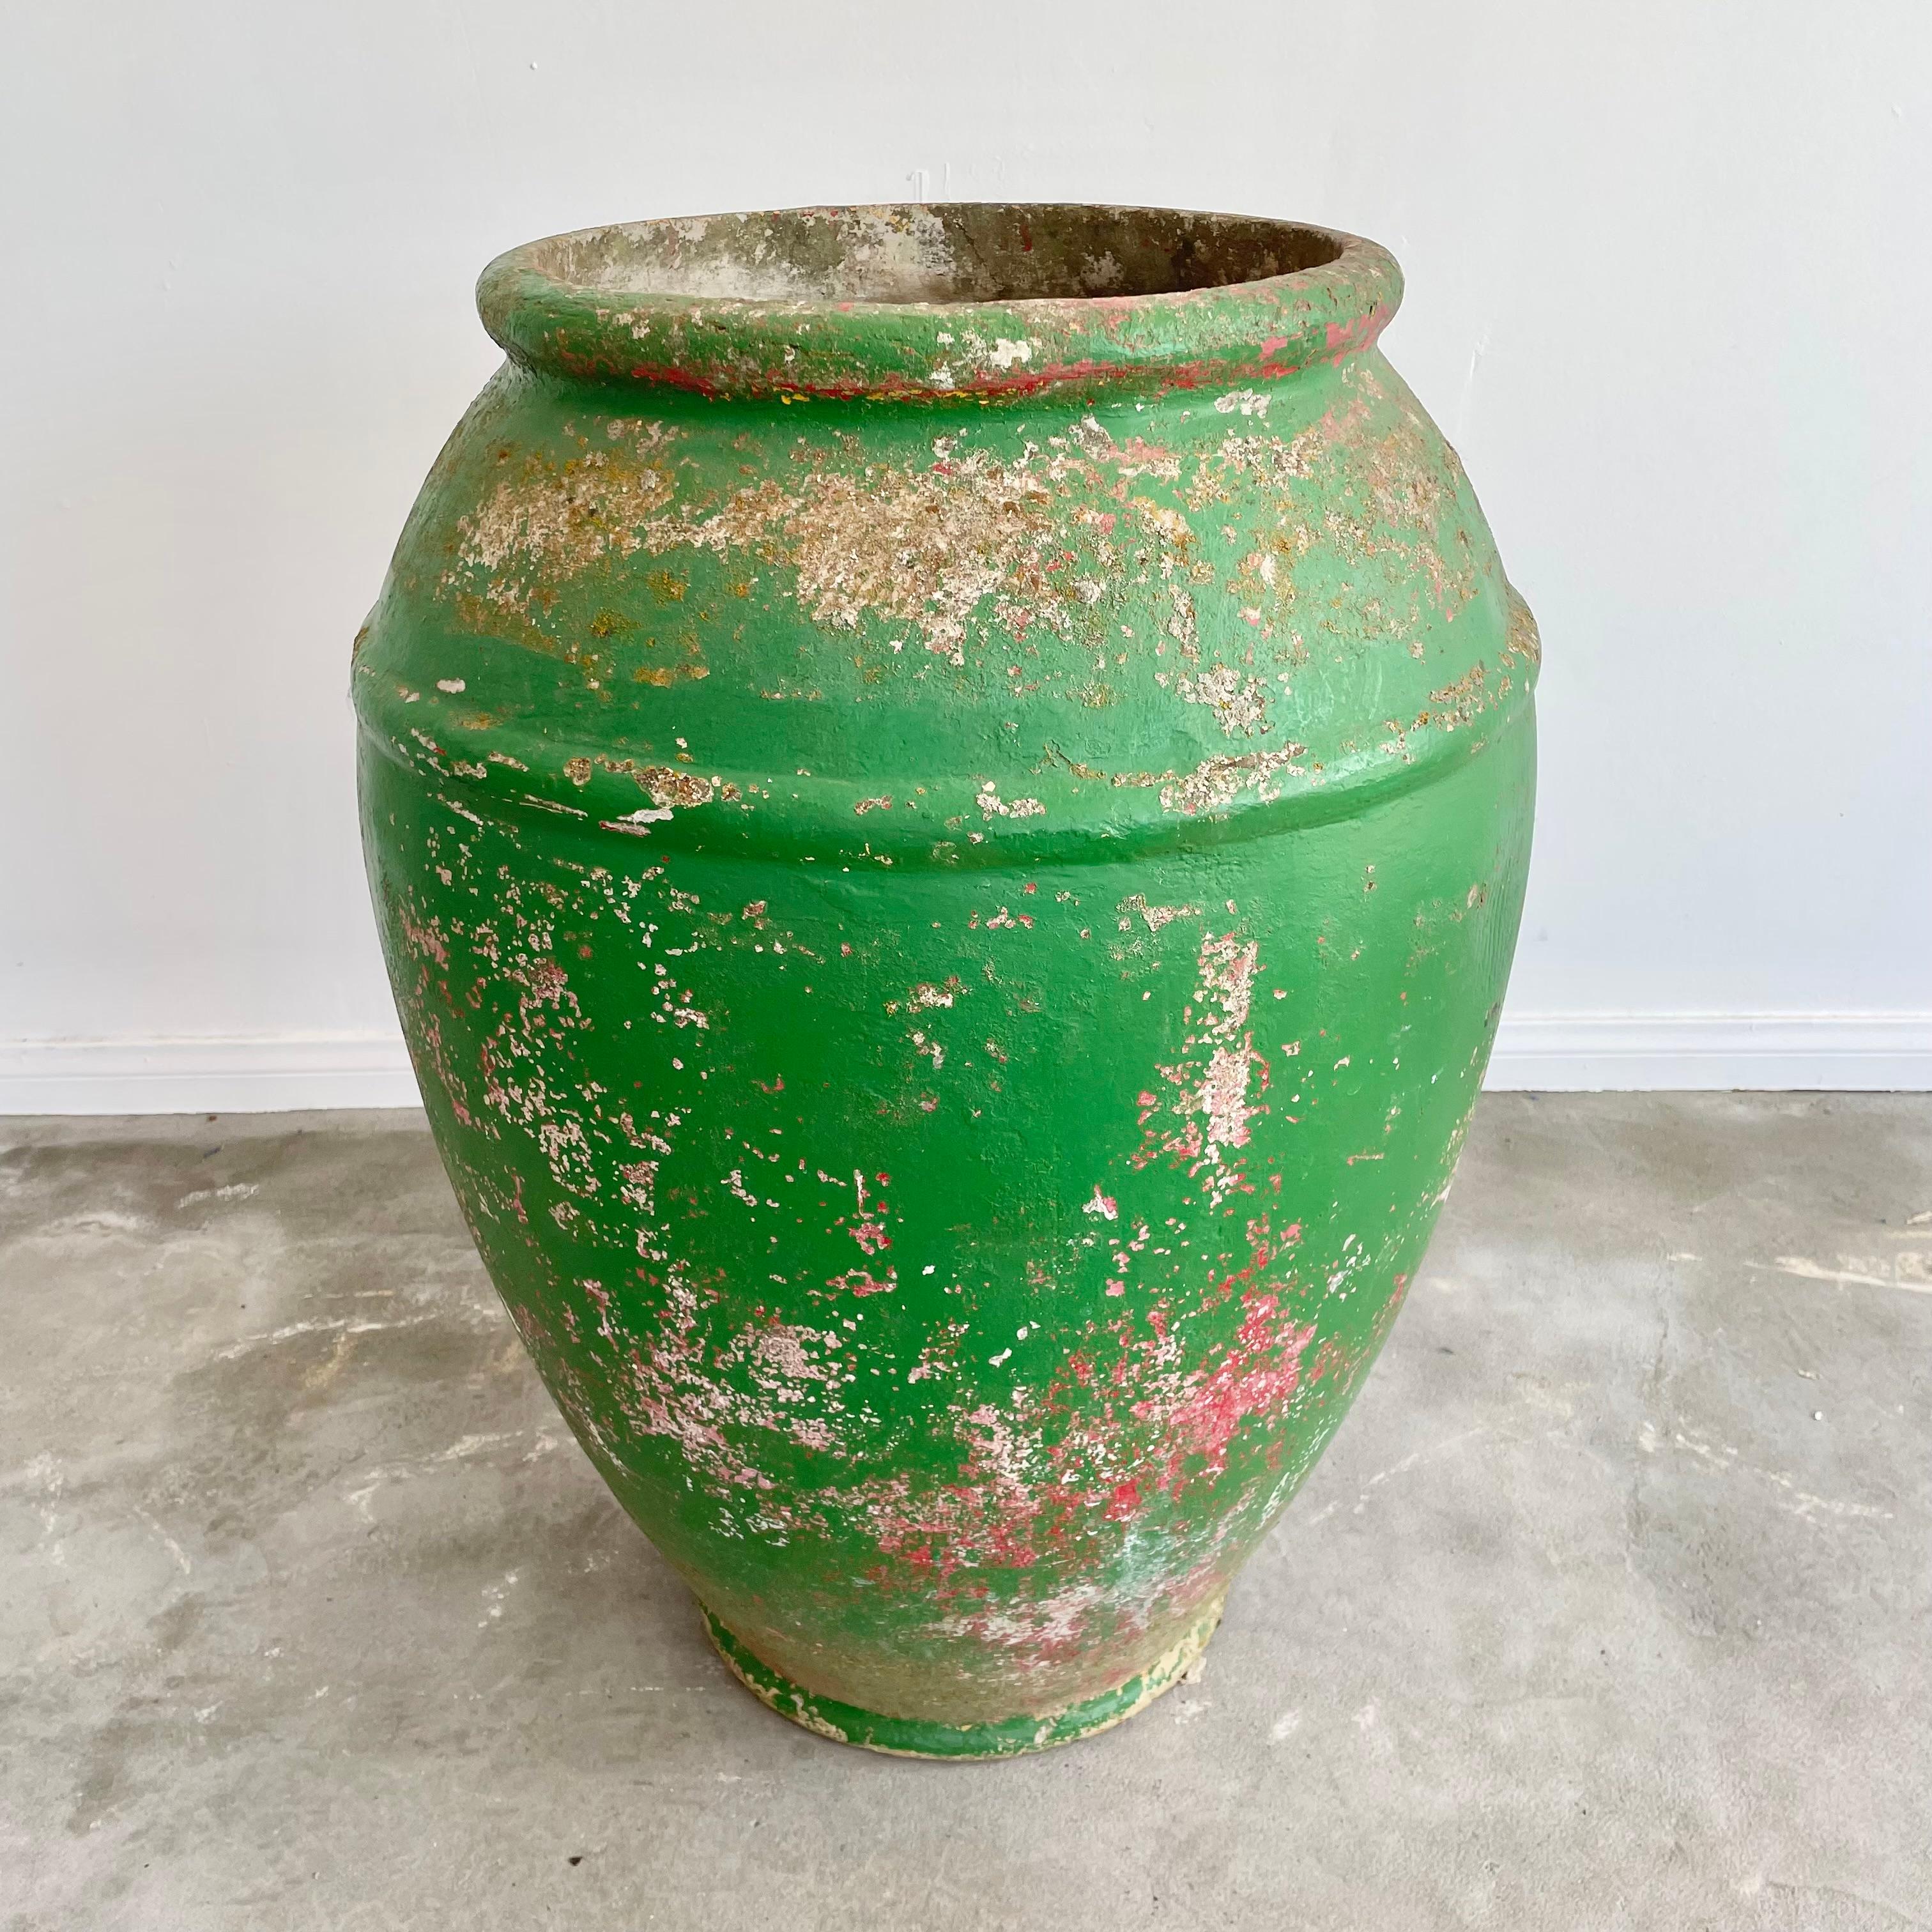 Unusual concrete urn by Willy Guhl. Rare model and size. Excellent green patina with undertones of red, pink and grey. Urn has a delicate cement ridge around the mouth as well as around the widest part of the jar giving it depth and great lines. The